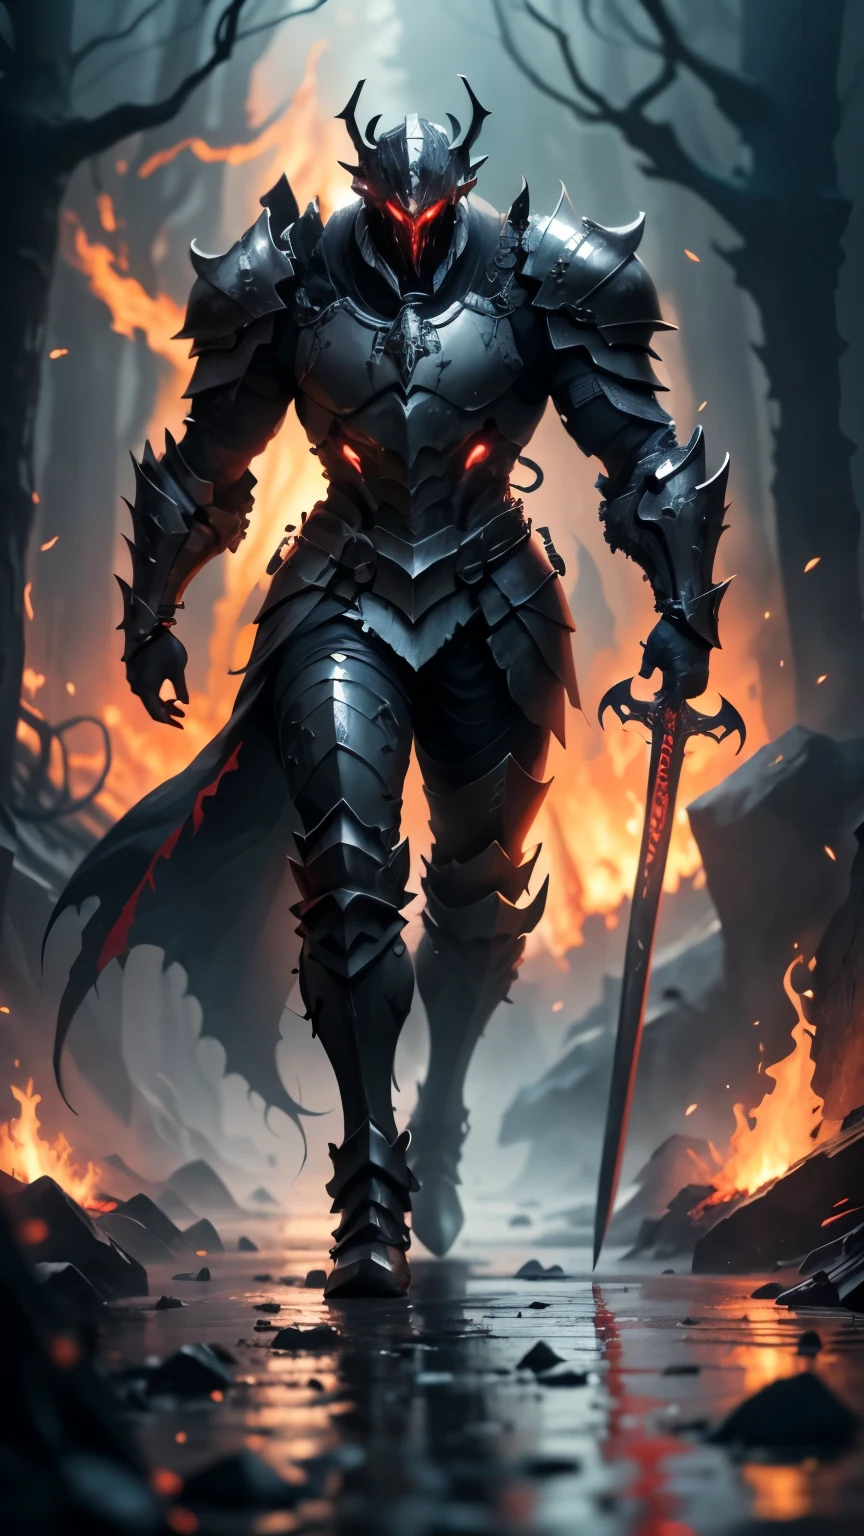 Knight in FULL plated Black Deadric knight striding through a lake of lava, Black light mixed with red,with black mist Black greatsword with broken red lines, background Death knight holding sword,Deadric knight standing in a dark rooom, burnt armor, black fire color reflected armor, steampunk bioarmor, redwood forest themed armor, demonic dragon inspired armor, corrupted armor, gothic armor, black and reddish color armor, cyberpunk flame suit, prince crown of black gears, demonic! compedium!, black gears, medieval, dynamic, FULL HD, REALISTIC FANTASY. Layered armor. (((Proportionate))) Black Capote, no weapons